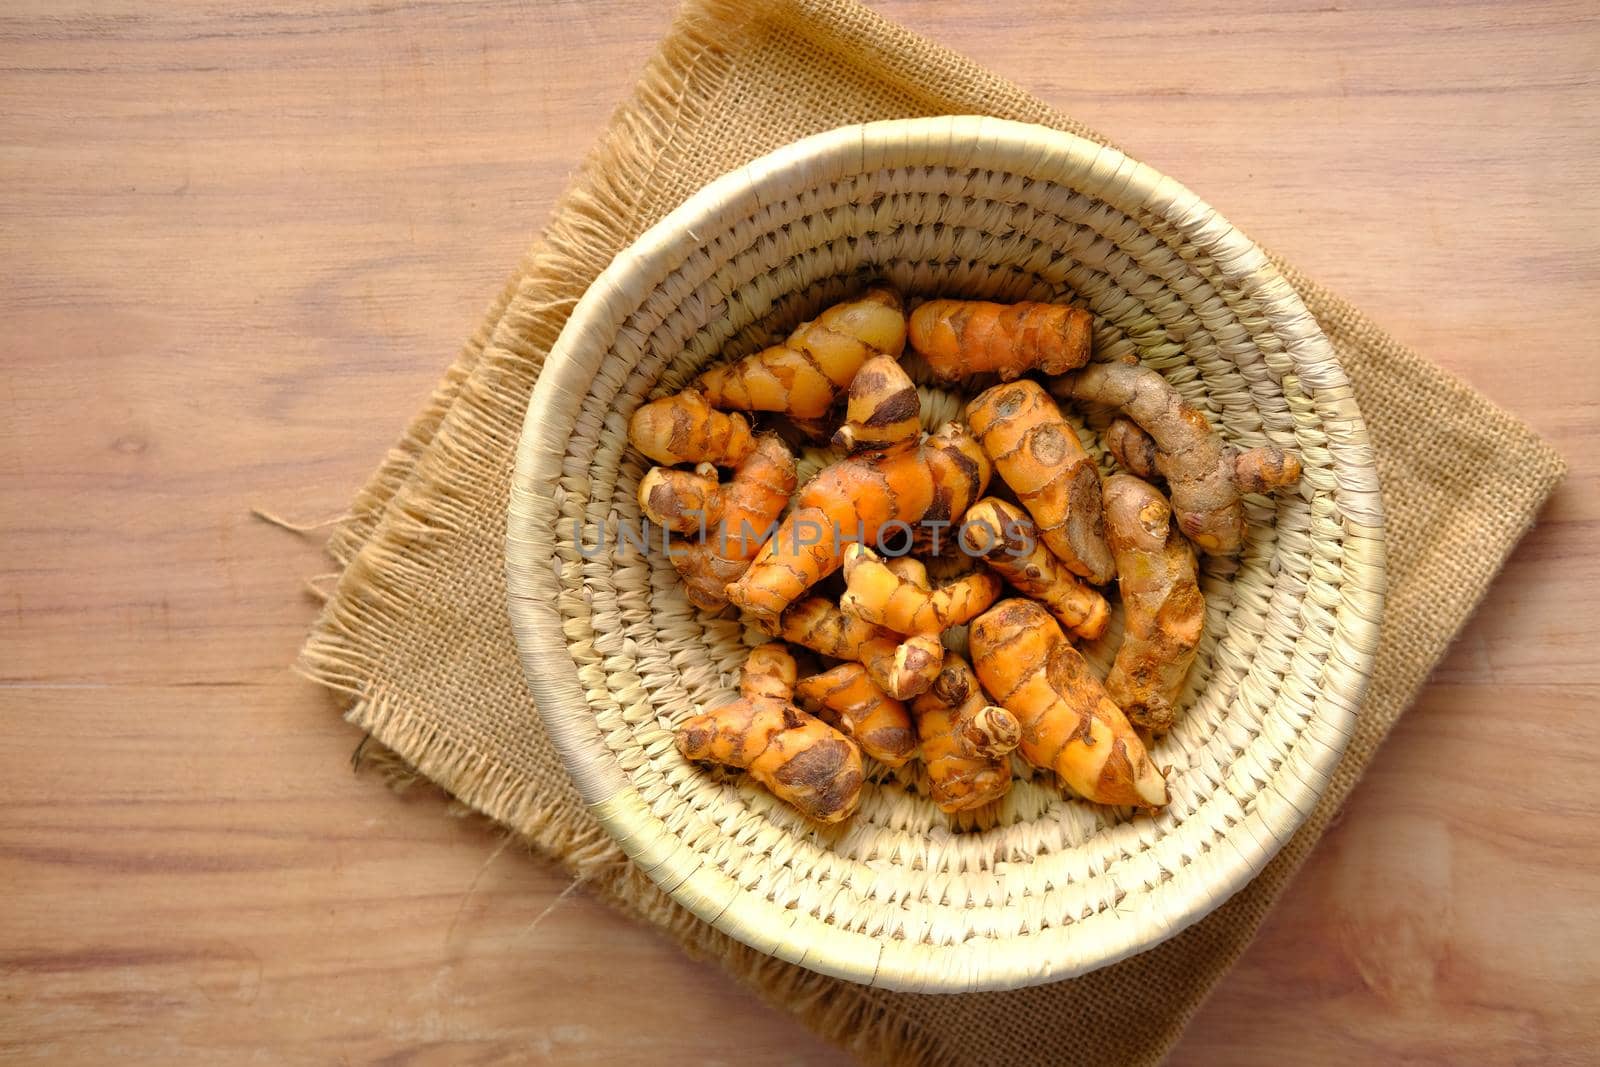 detail shot of turmeric root in bowl on table